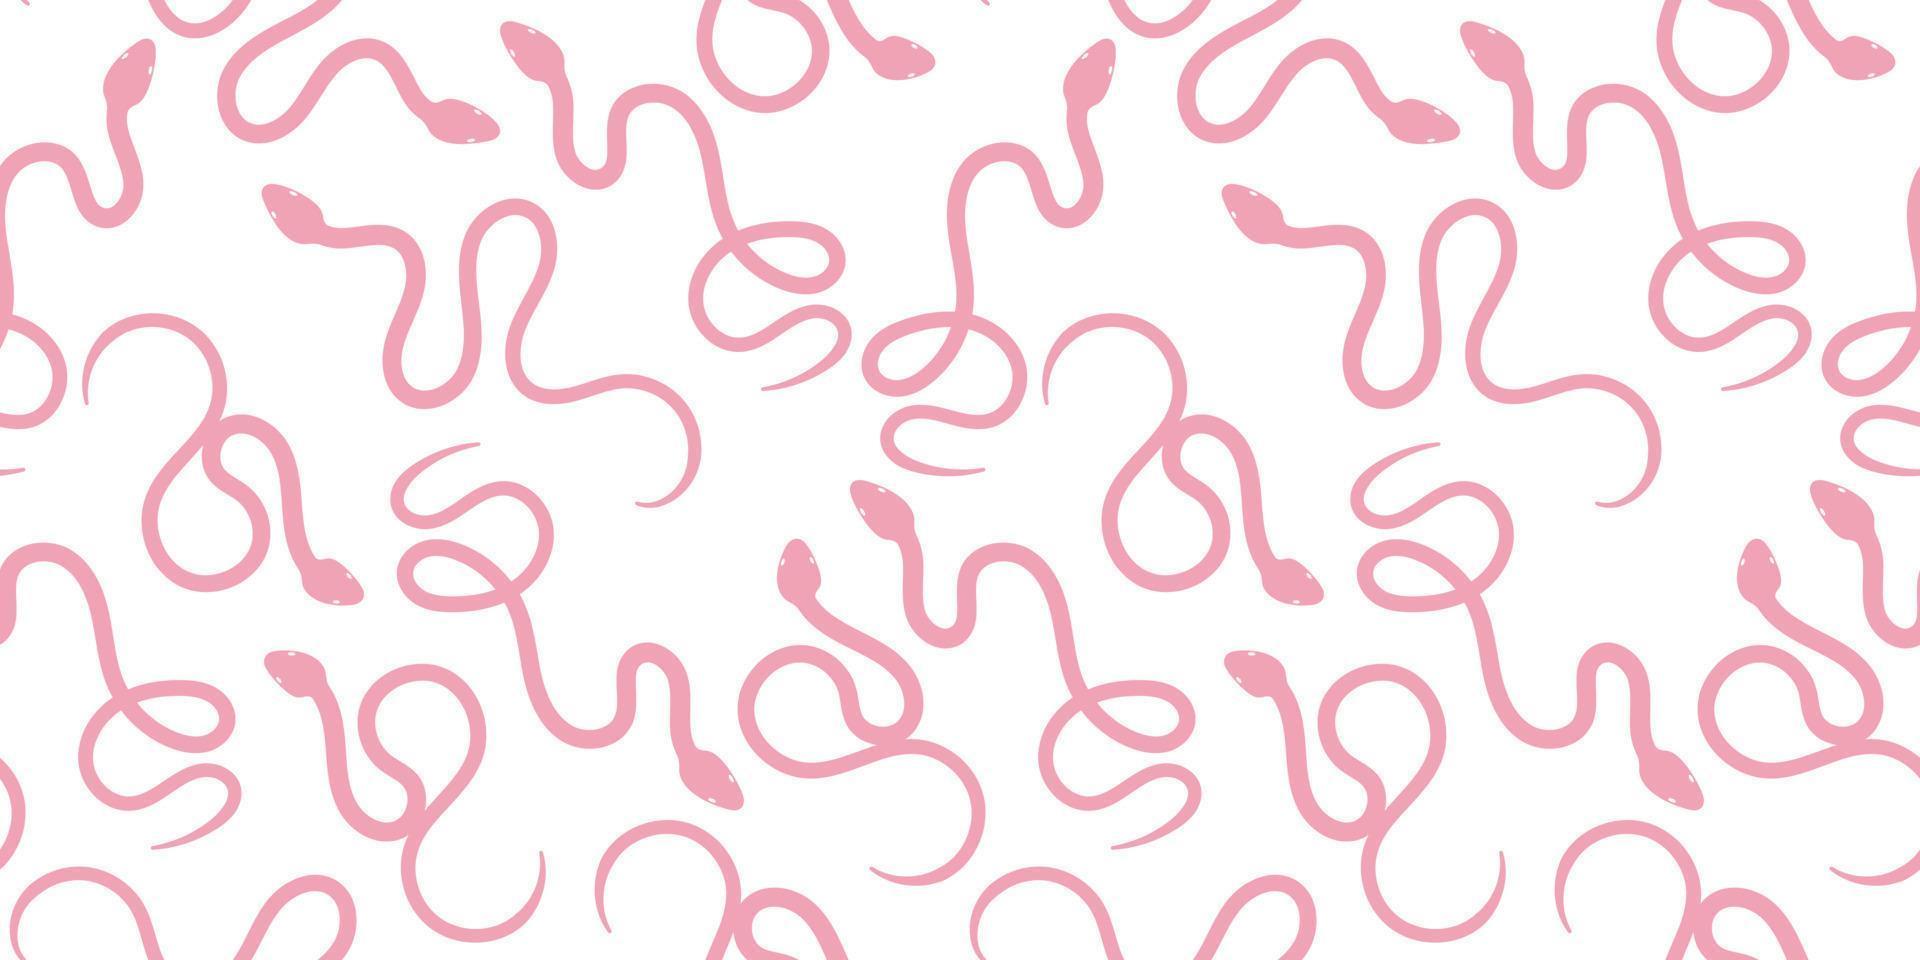 Pink snakes seamless repeat pattern background vector